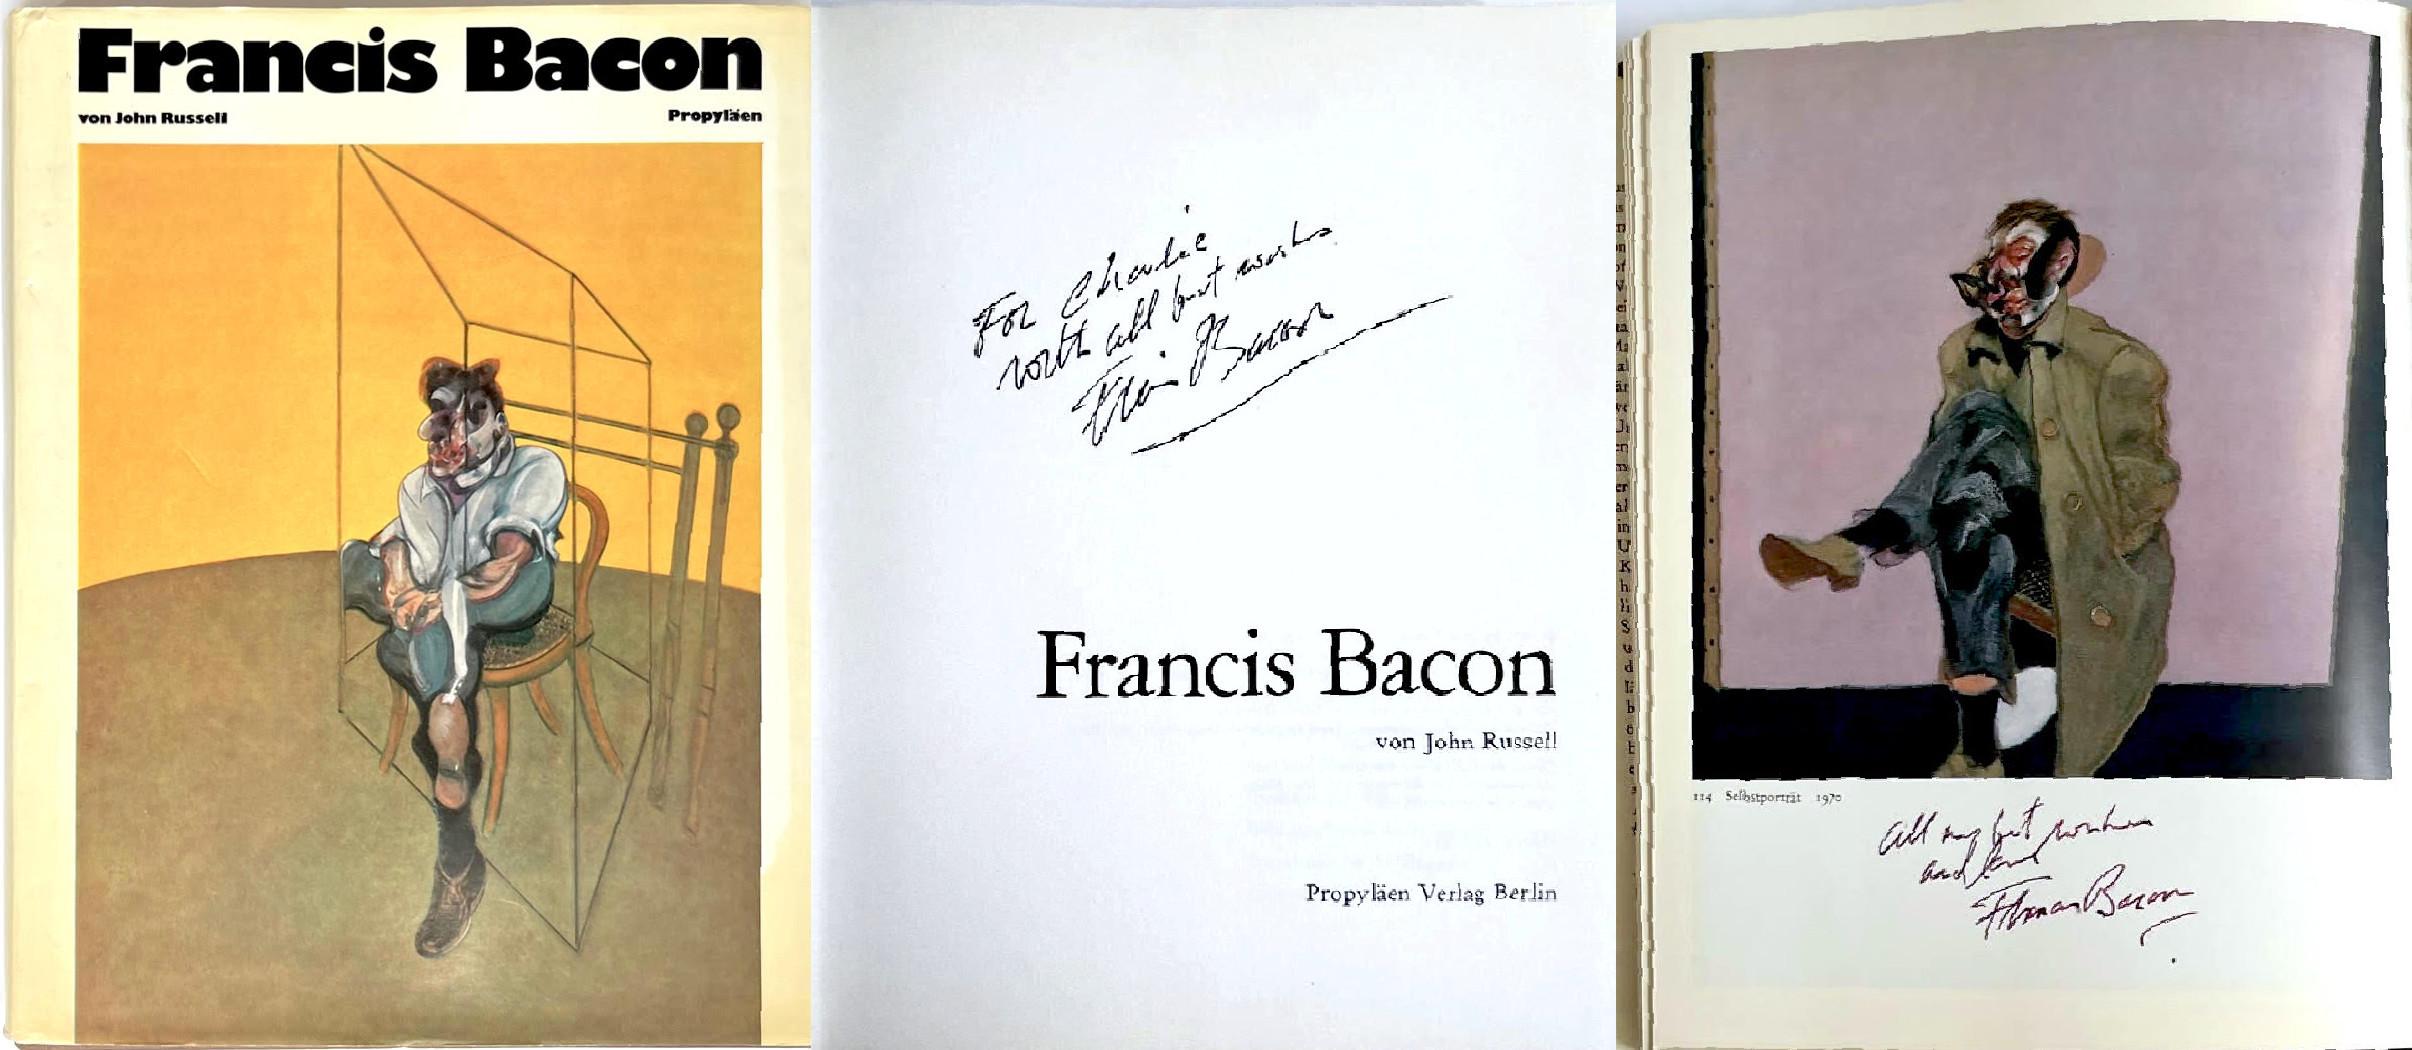 francis bacon papst